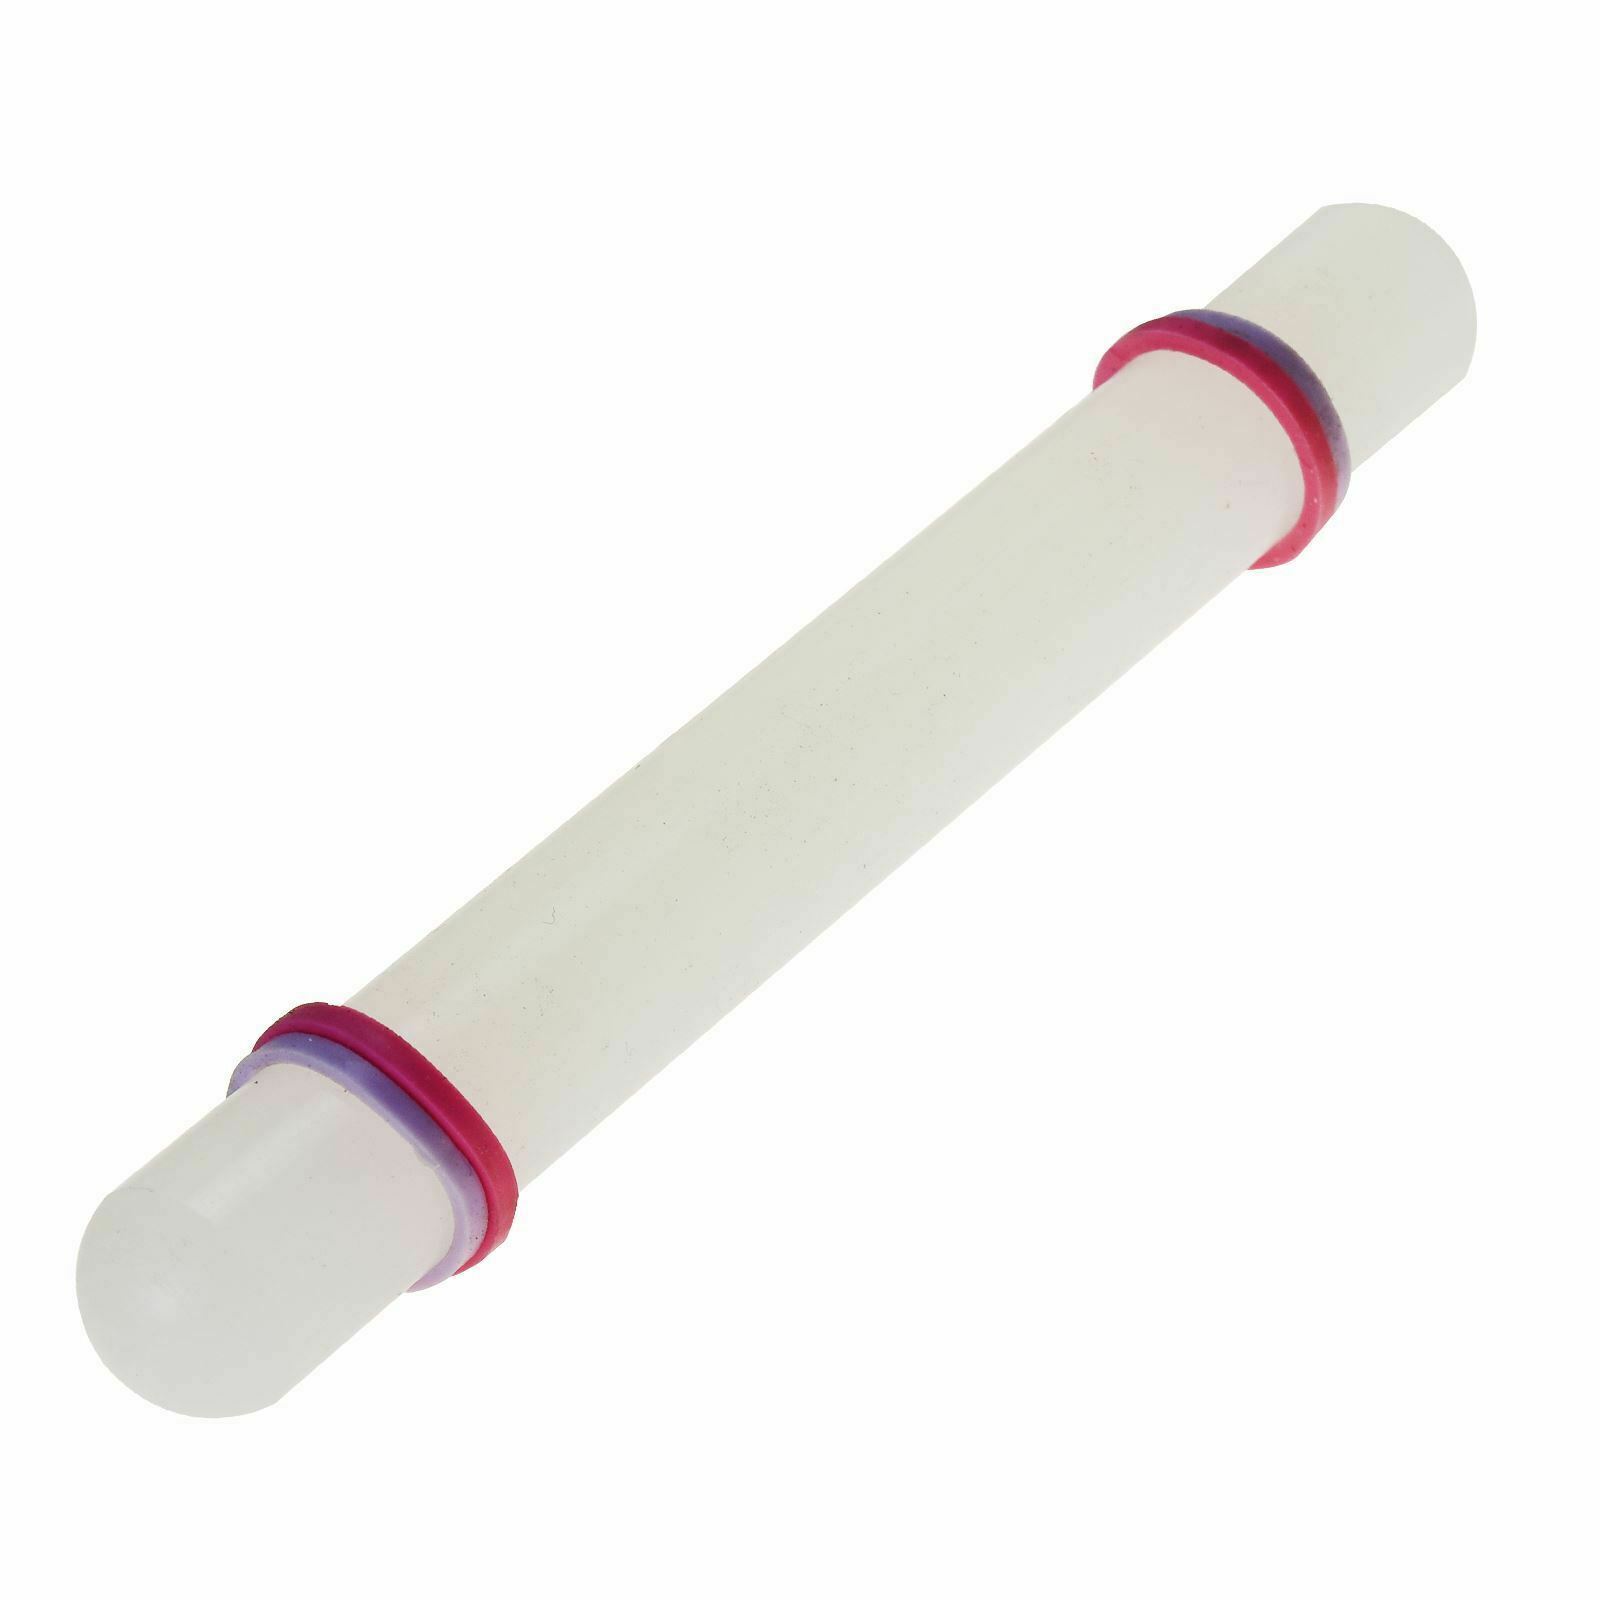 attachment-https://www.cupcakeaddicts.co.uk/wp-content/uploads/imported/4/Rolling-Pin-with-Adjustable-Guide-Rings-pastry-Icing-Fondant-Cake-Decorating-322526273754-2.jpg